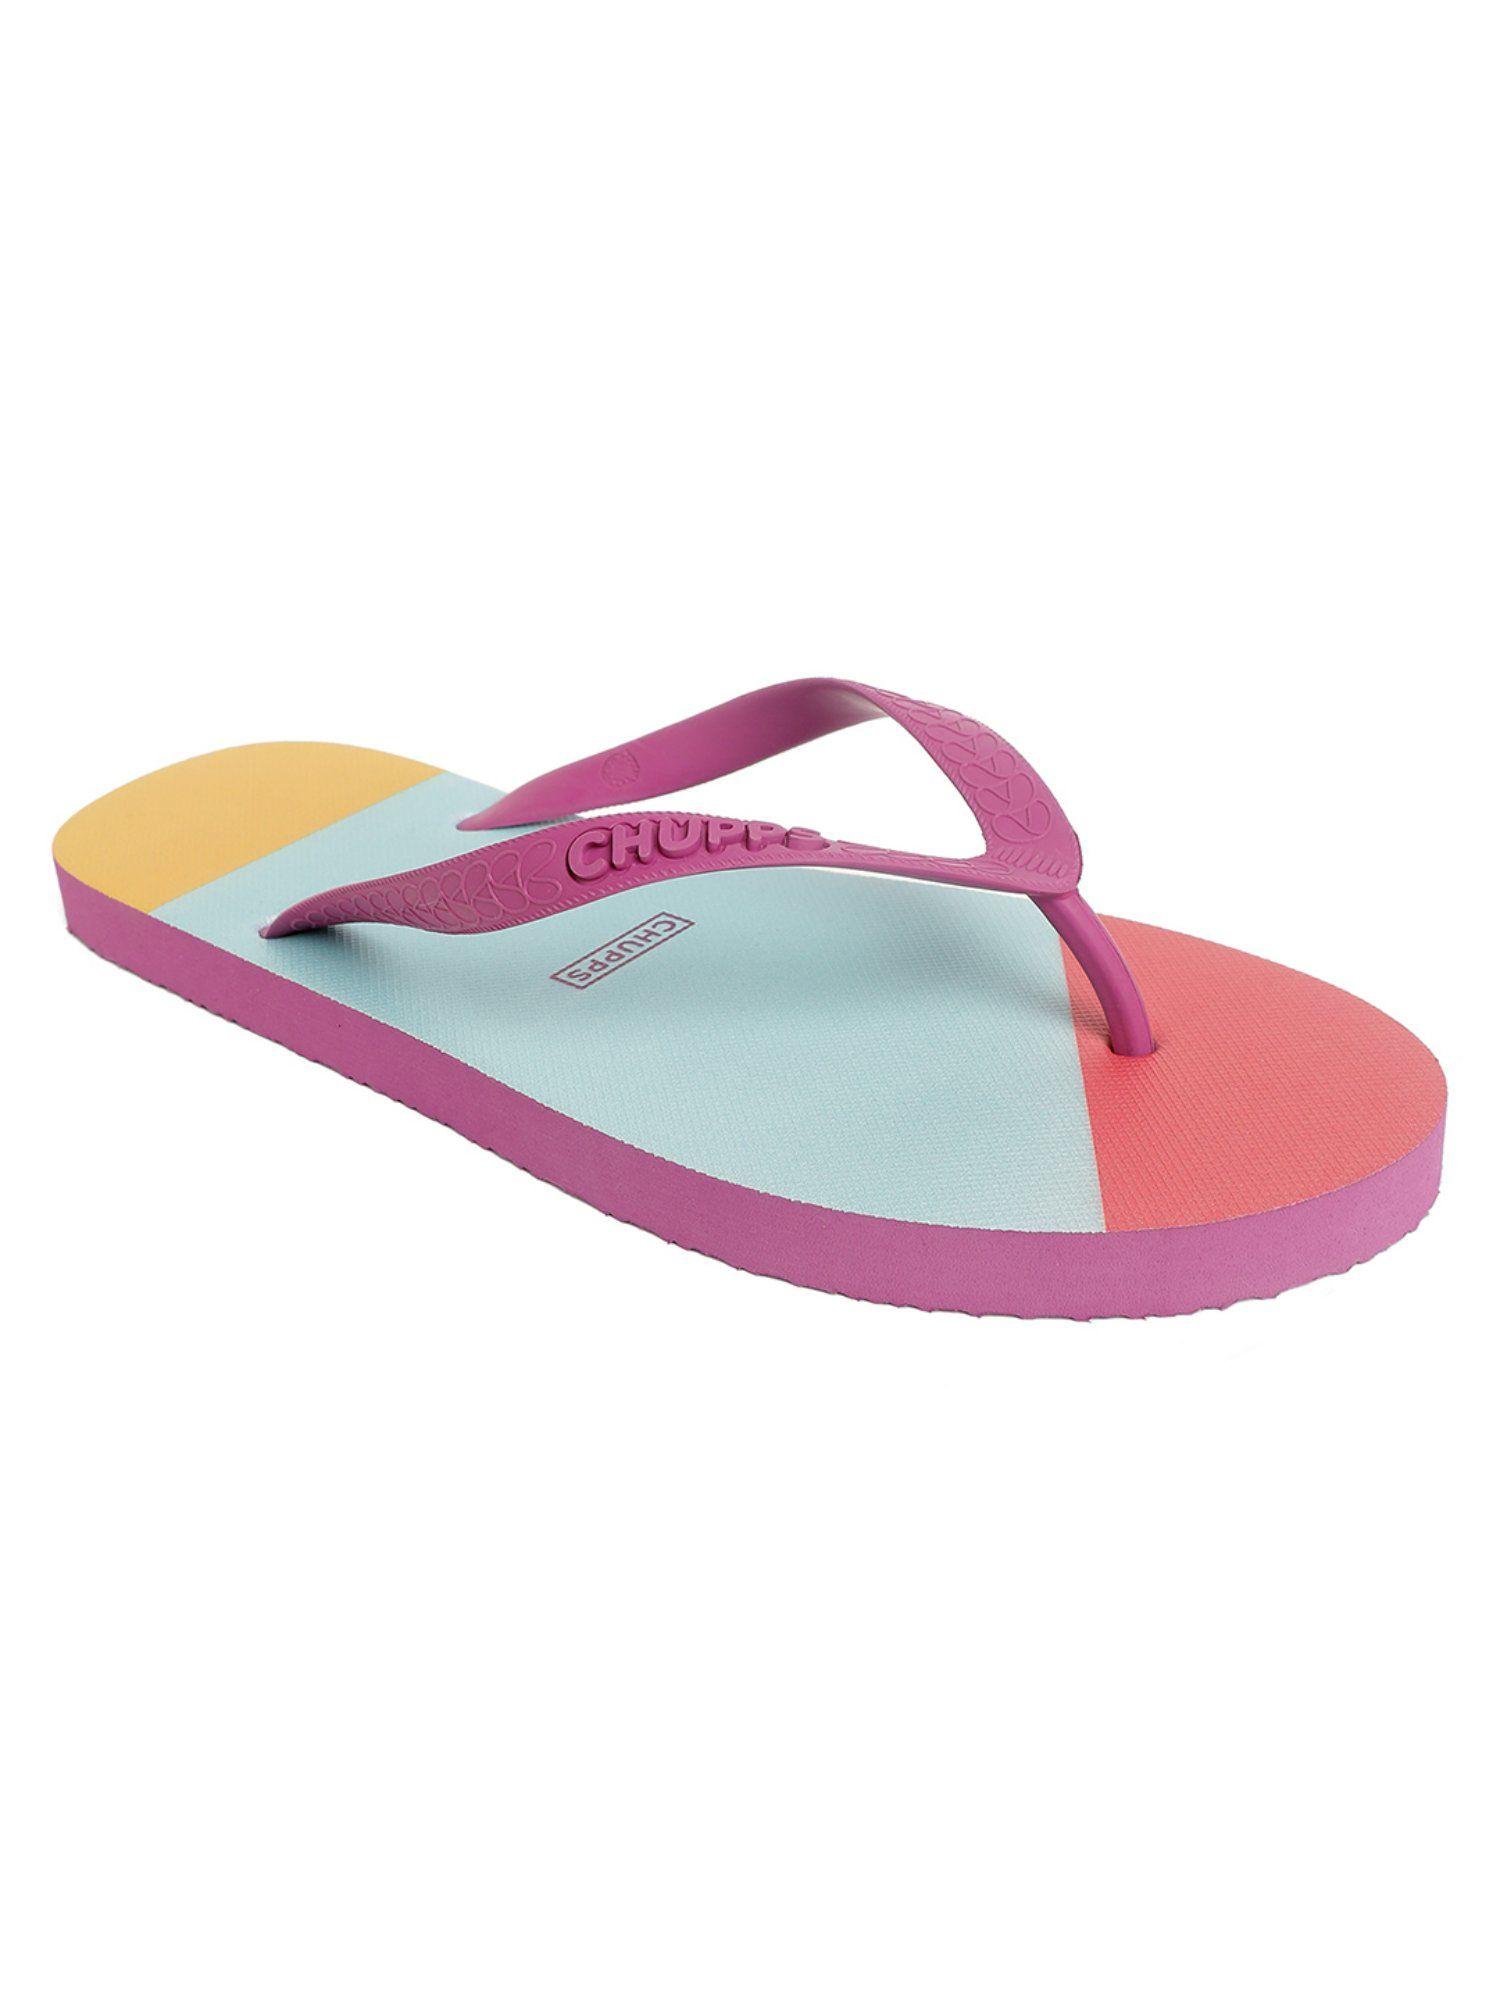 patang collection clover purple flipflops